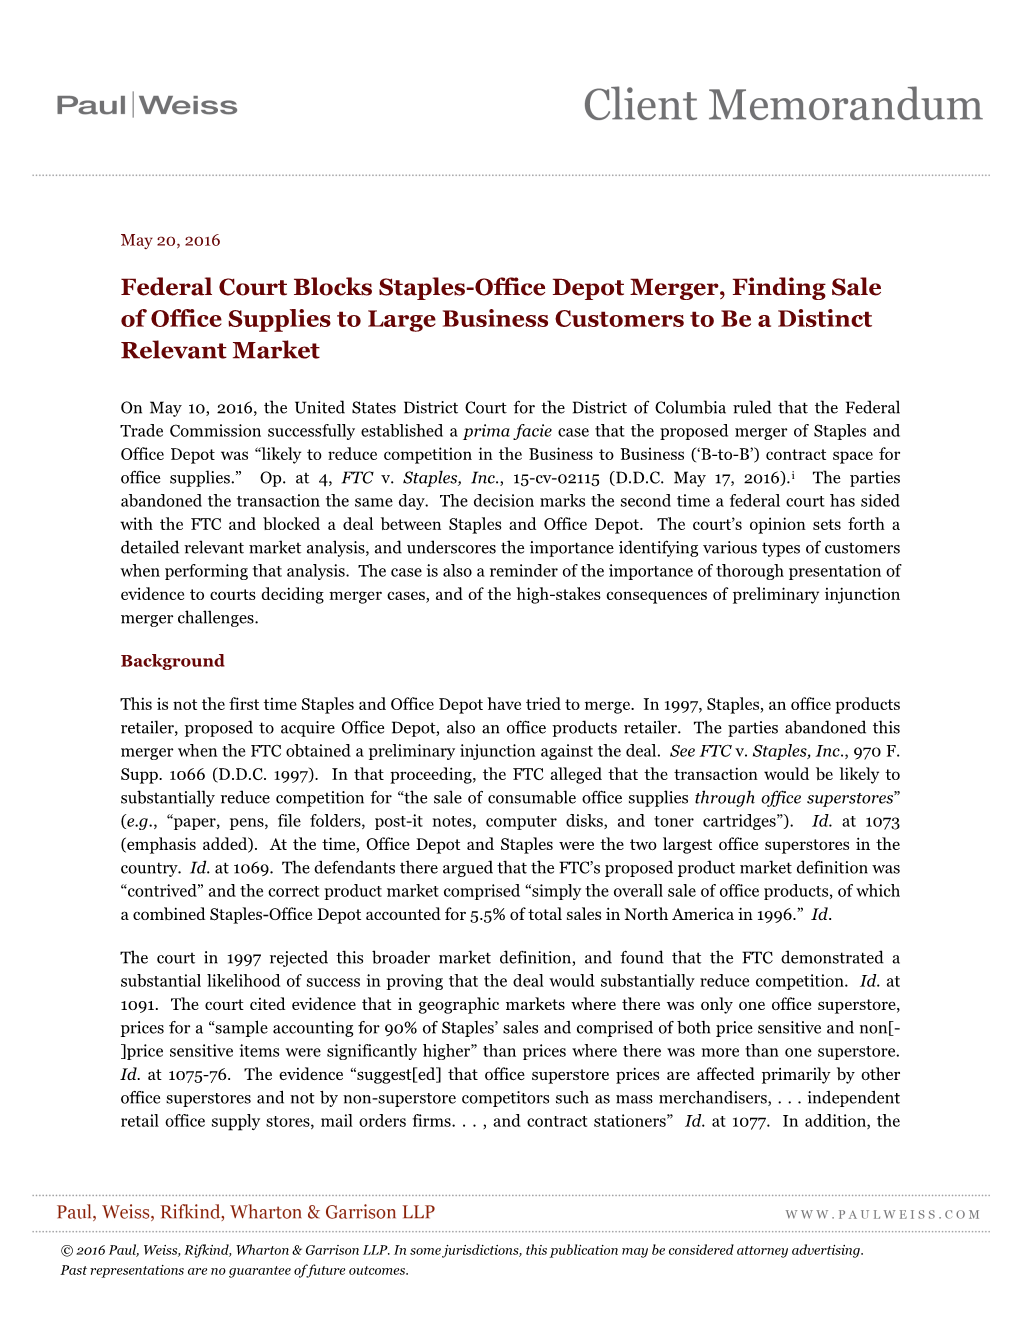 Federal Court Blocks Staples-Office Depot Merger, Finding Sale of Office Supplies to Large Business Customers to Be a Distinct Relevant Market